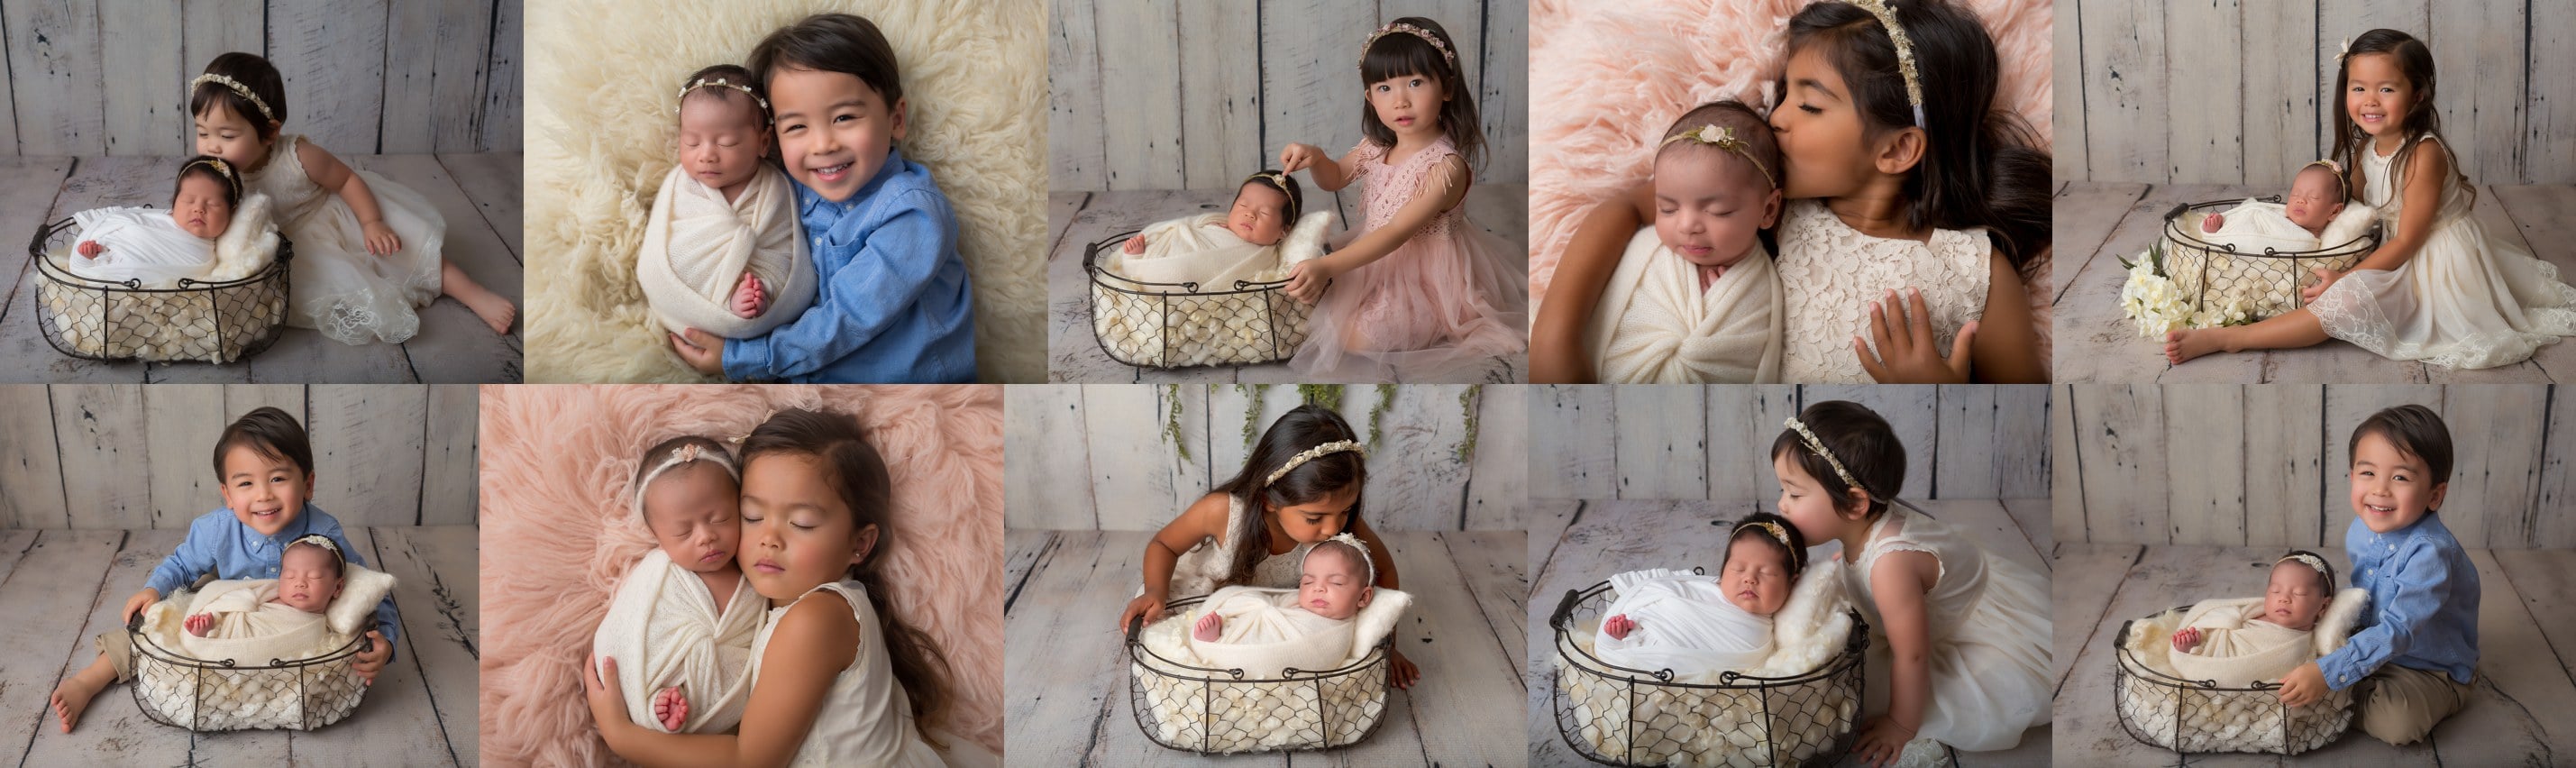 Collage of kids with their newborn siblings at photoshoot